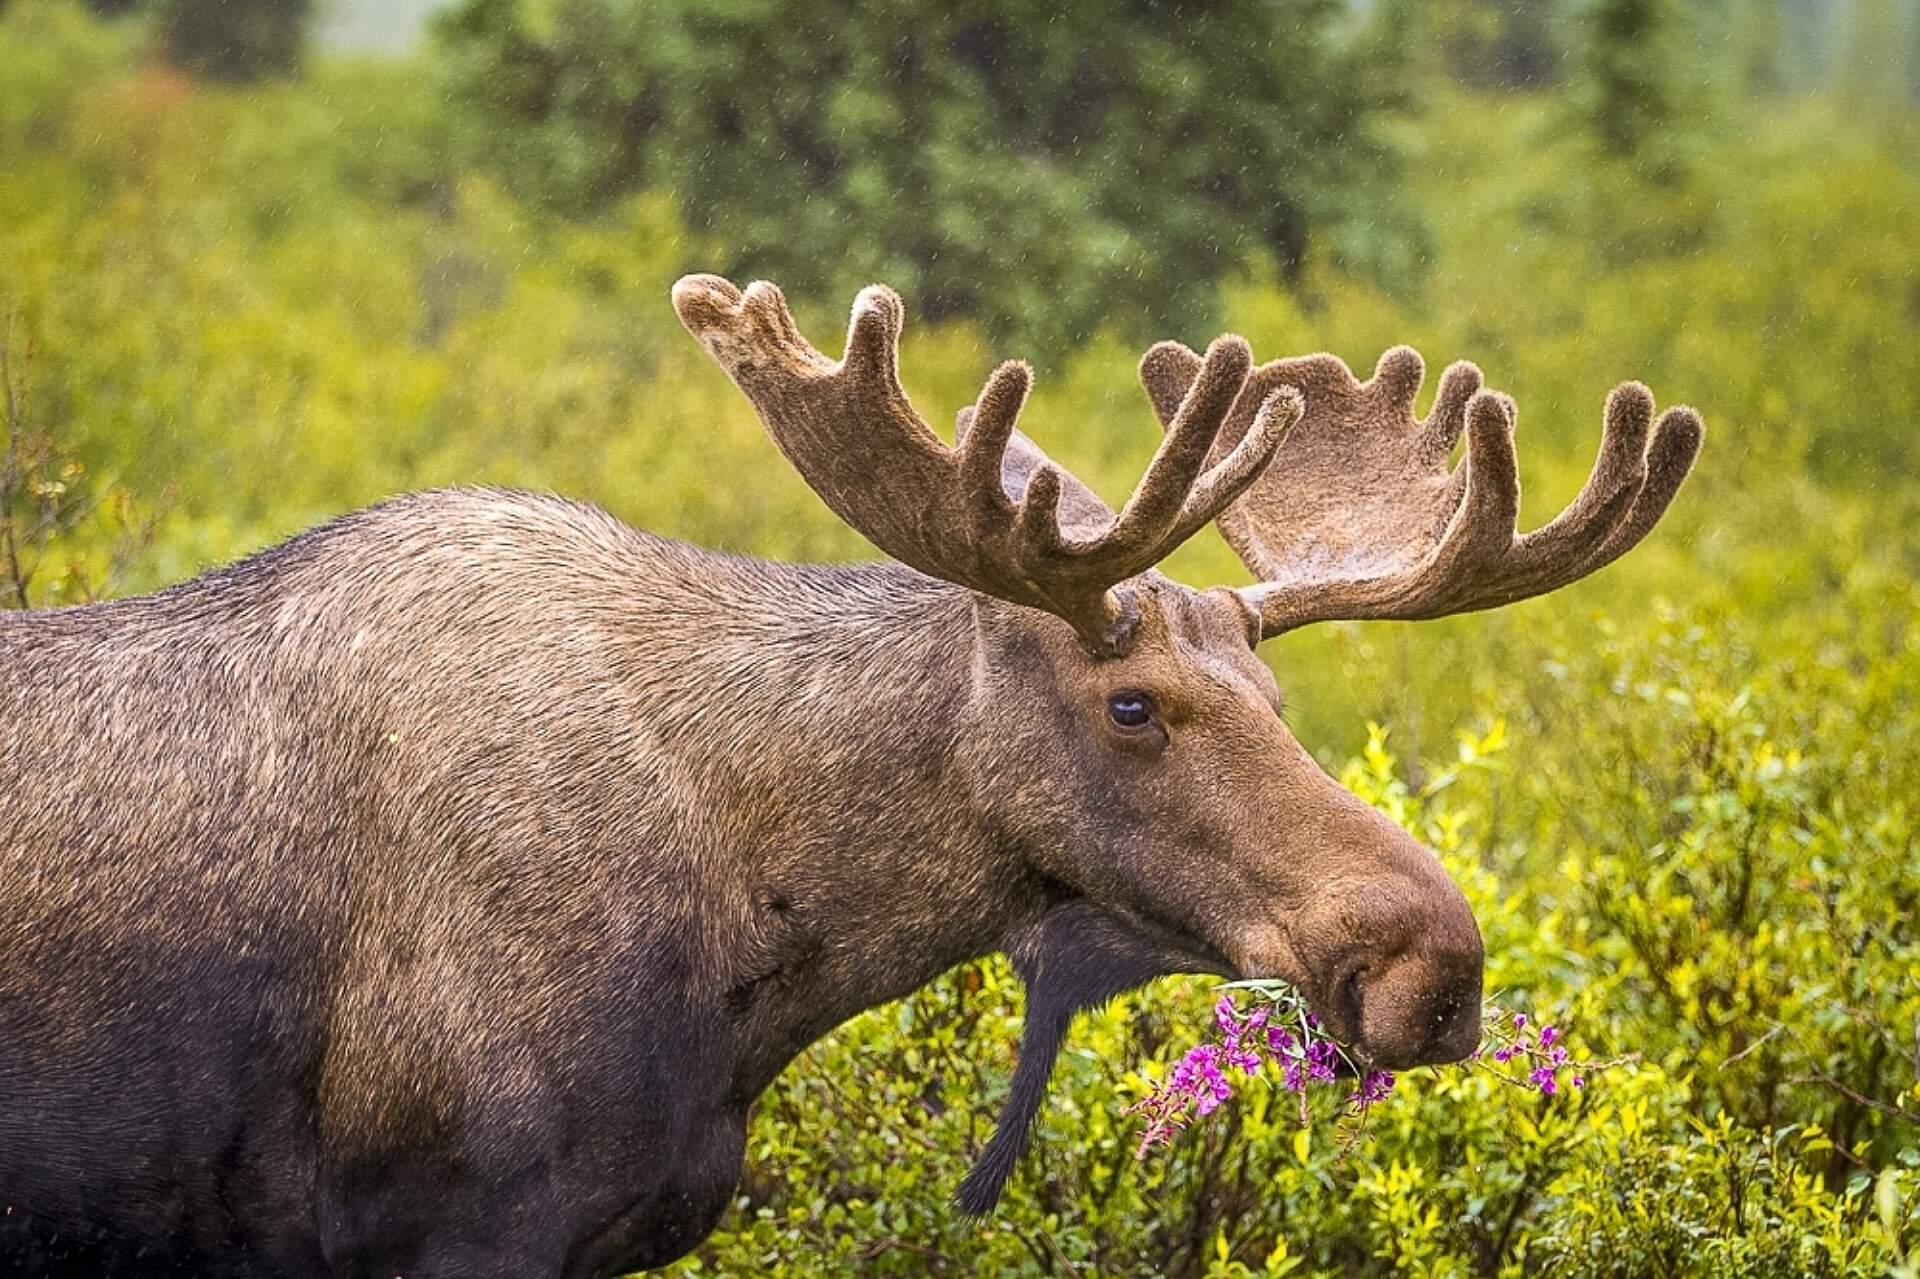 Moose Natural History Tour i Stock 000014308330 Medium Boreal Forest